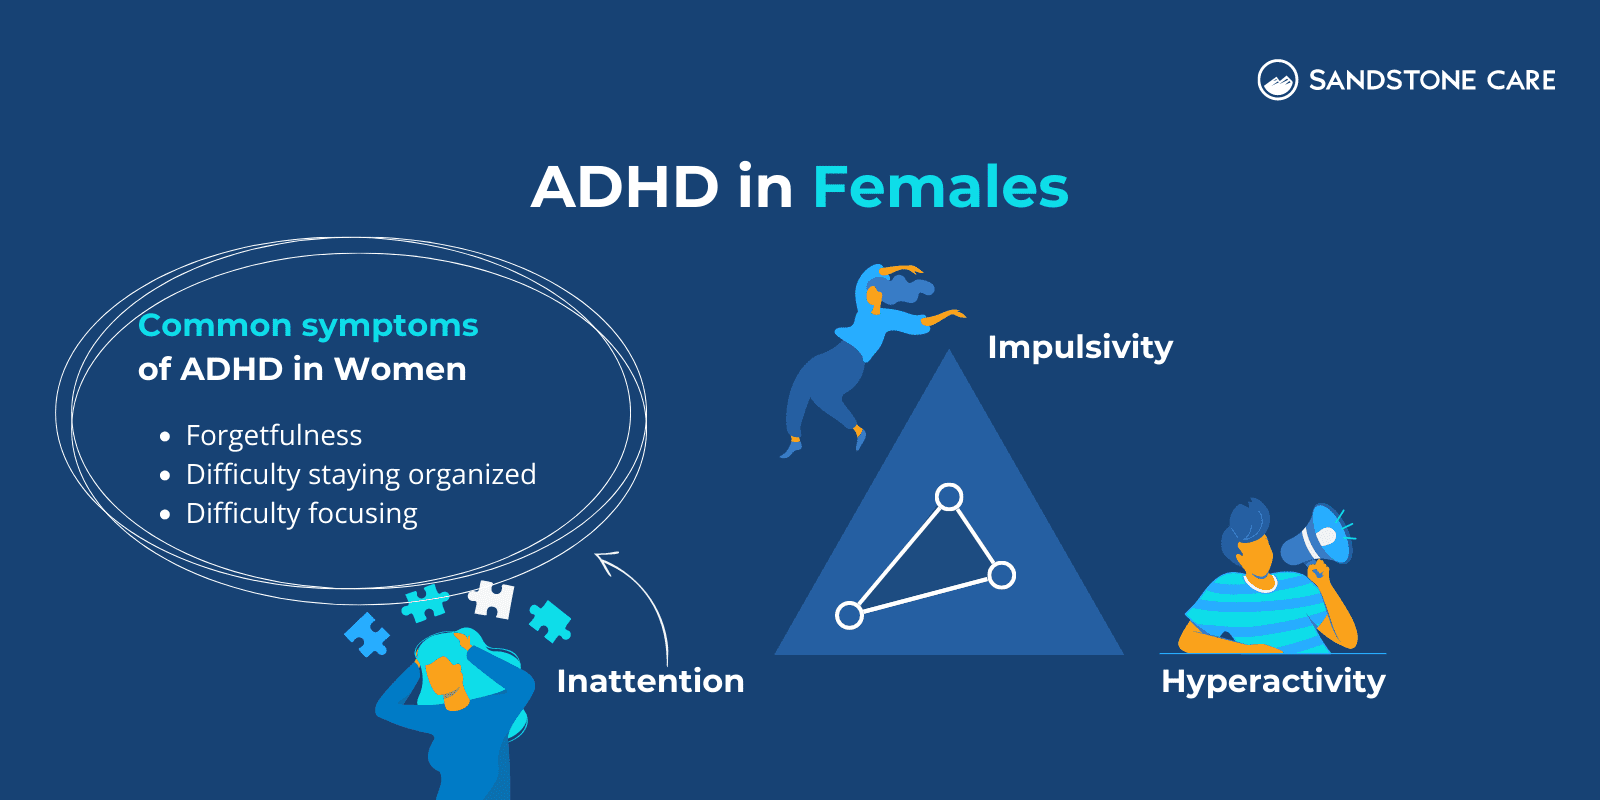 ADHD In Females illustrated with 3 major symptoms of ADHD and how typical women with ADHD displays those symptoms